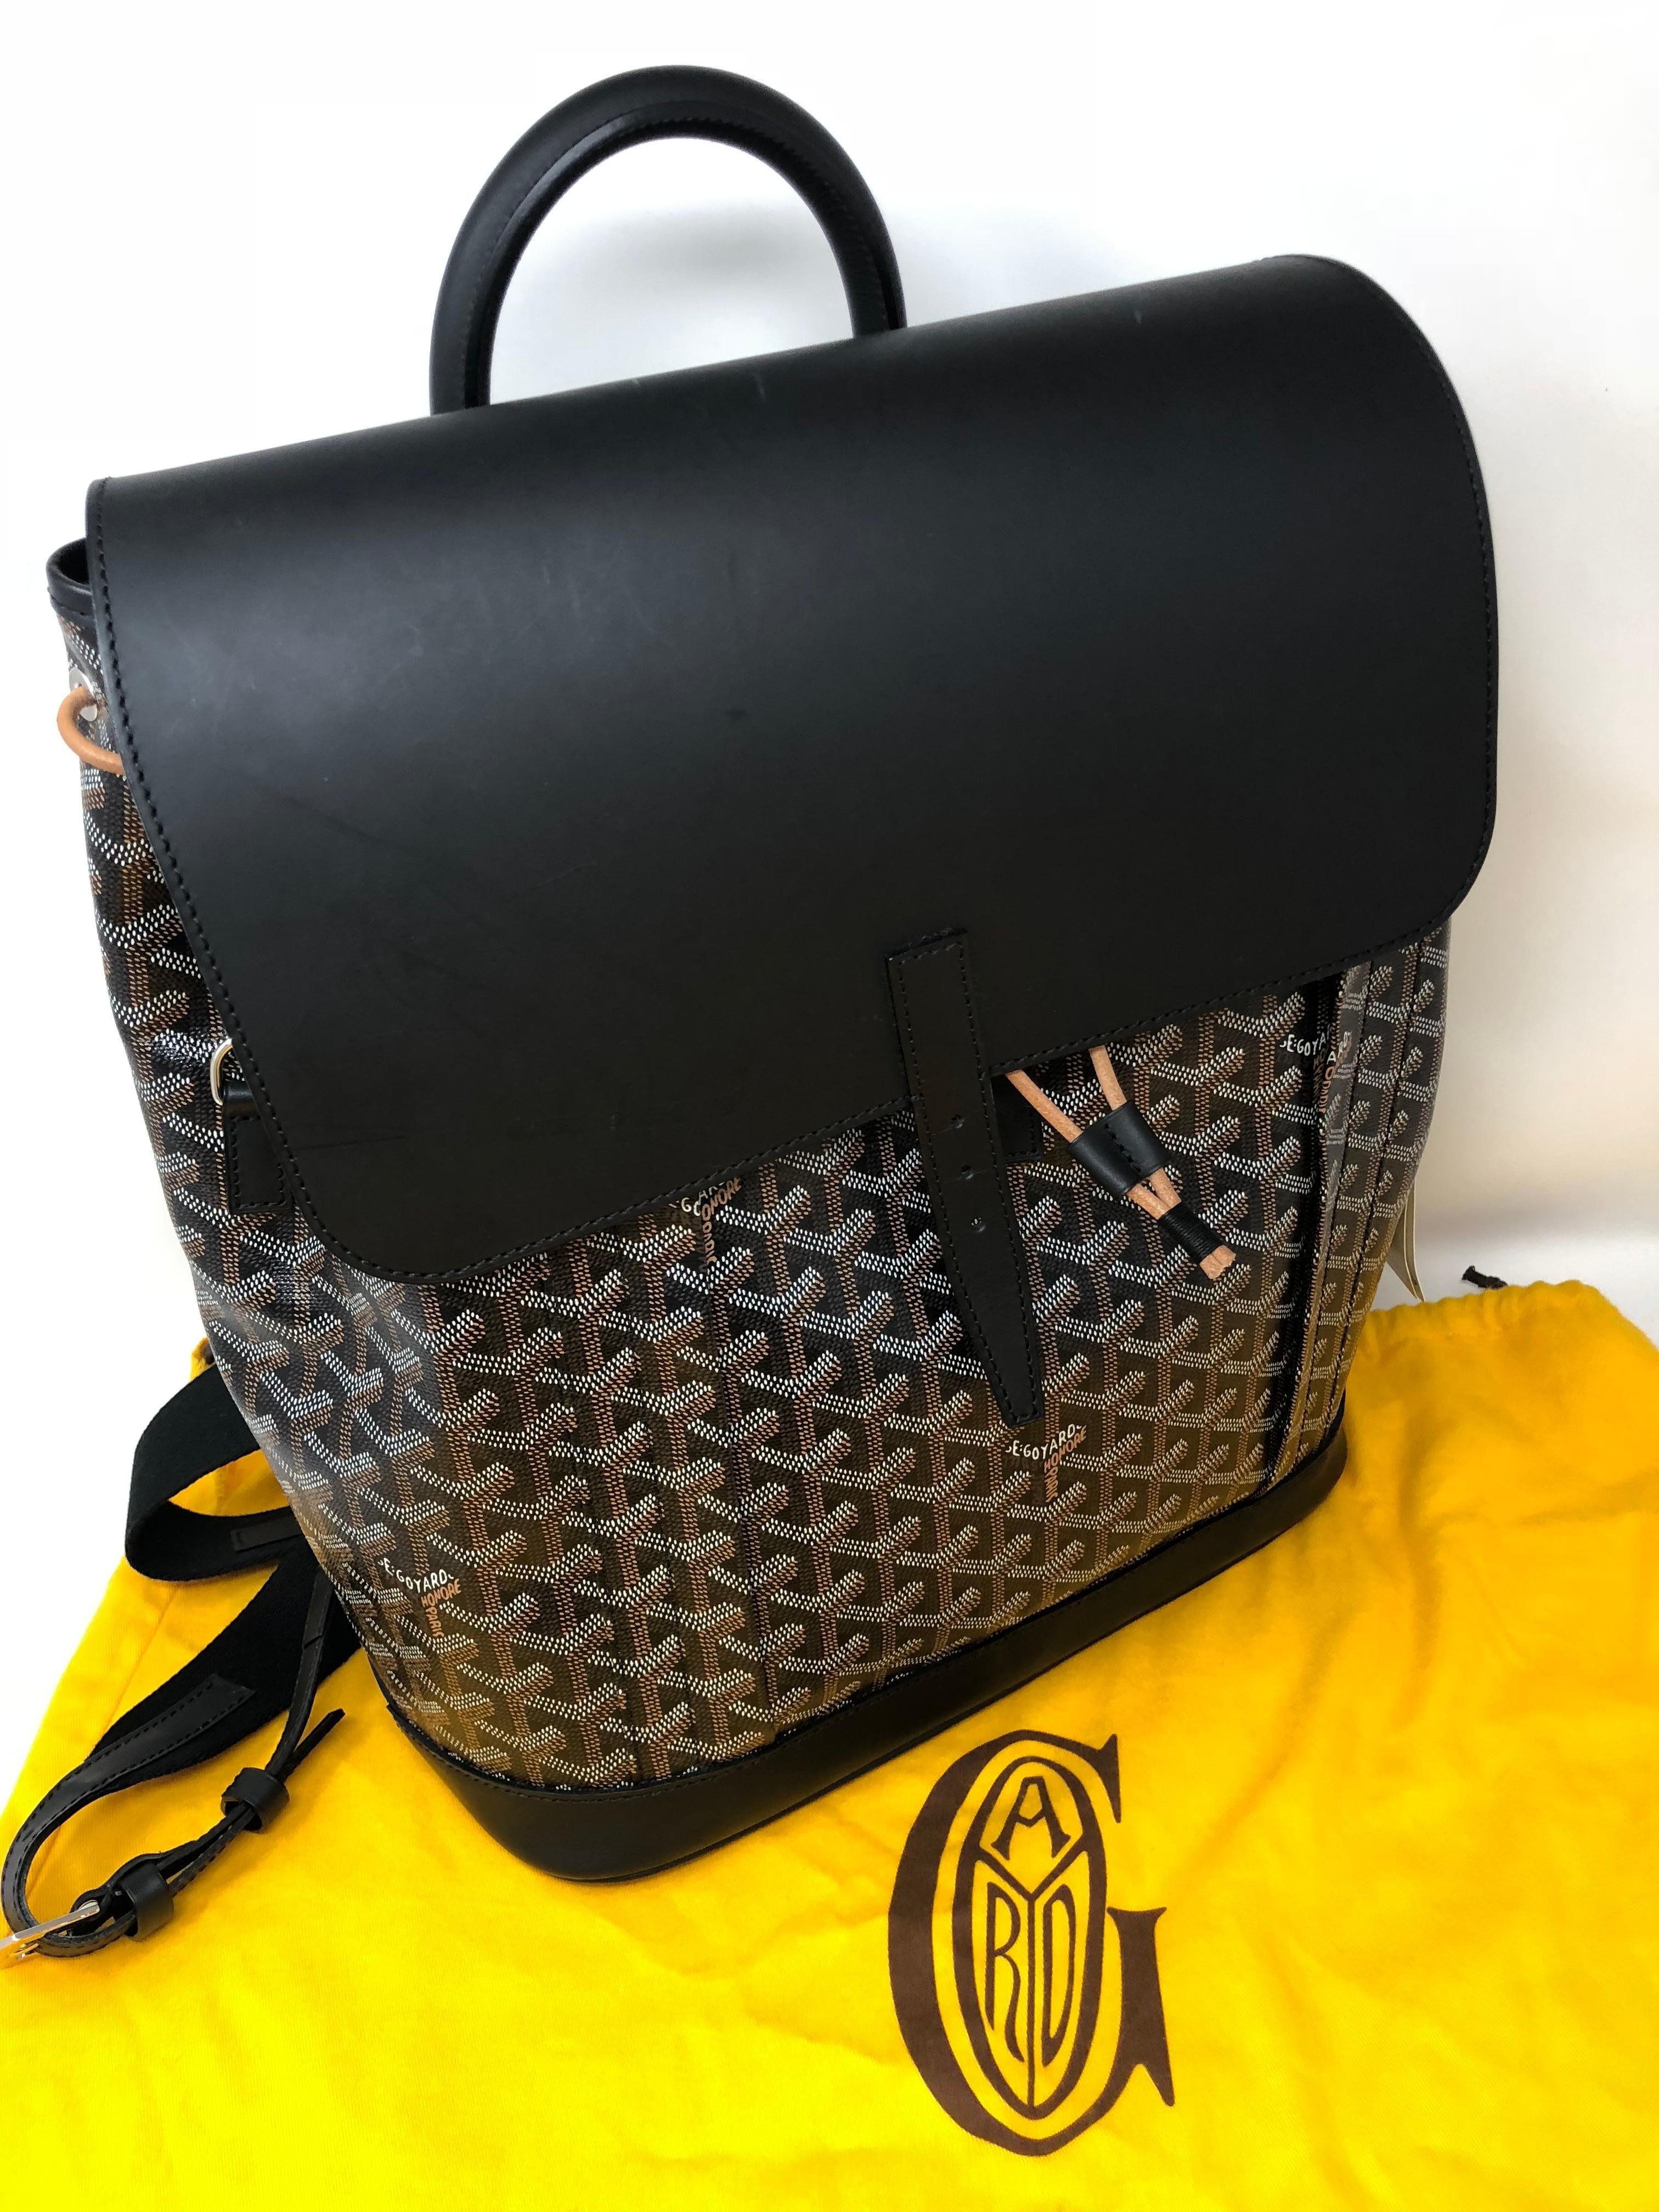 Goyard Alpin Black Chevron and Calfskin Backpack never used. The most coveted backpack with waiting lists over months. Comes with original dust cover.  Plastic still on hardware. The Alpin is the most wanted. Guaranteed authentic. 